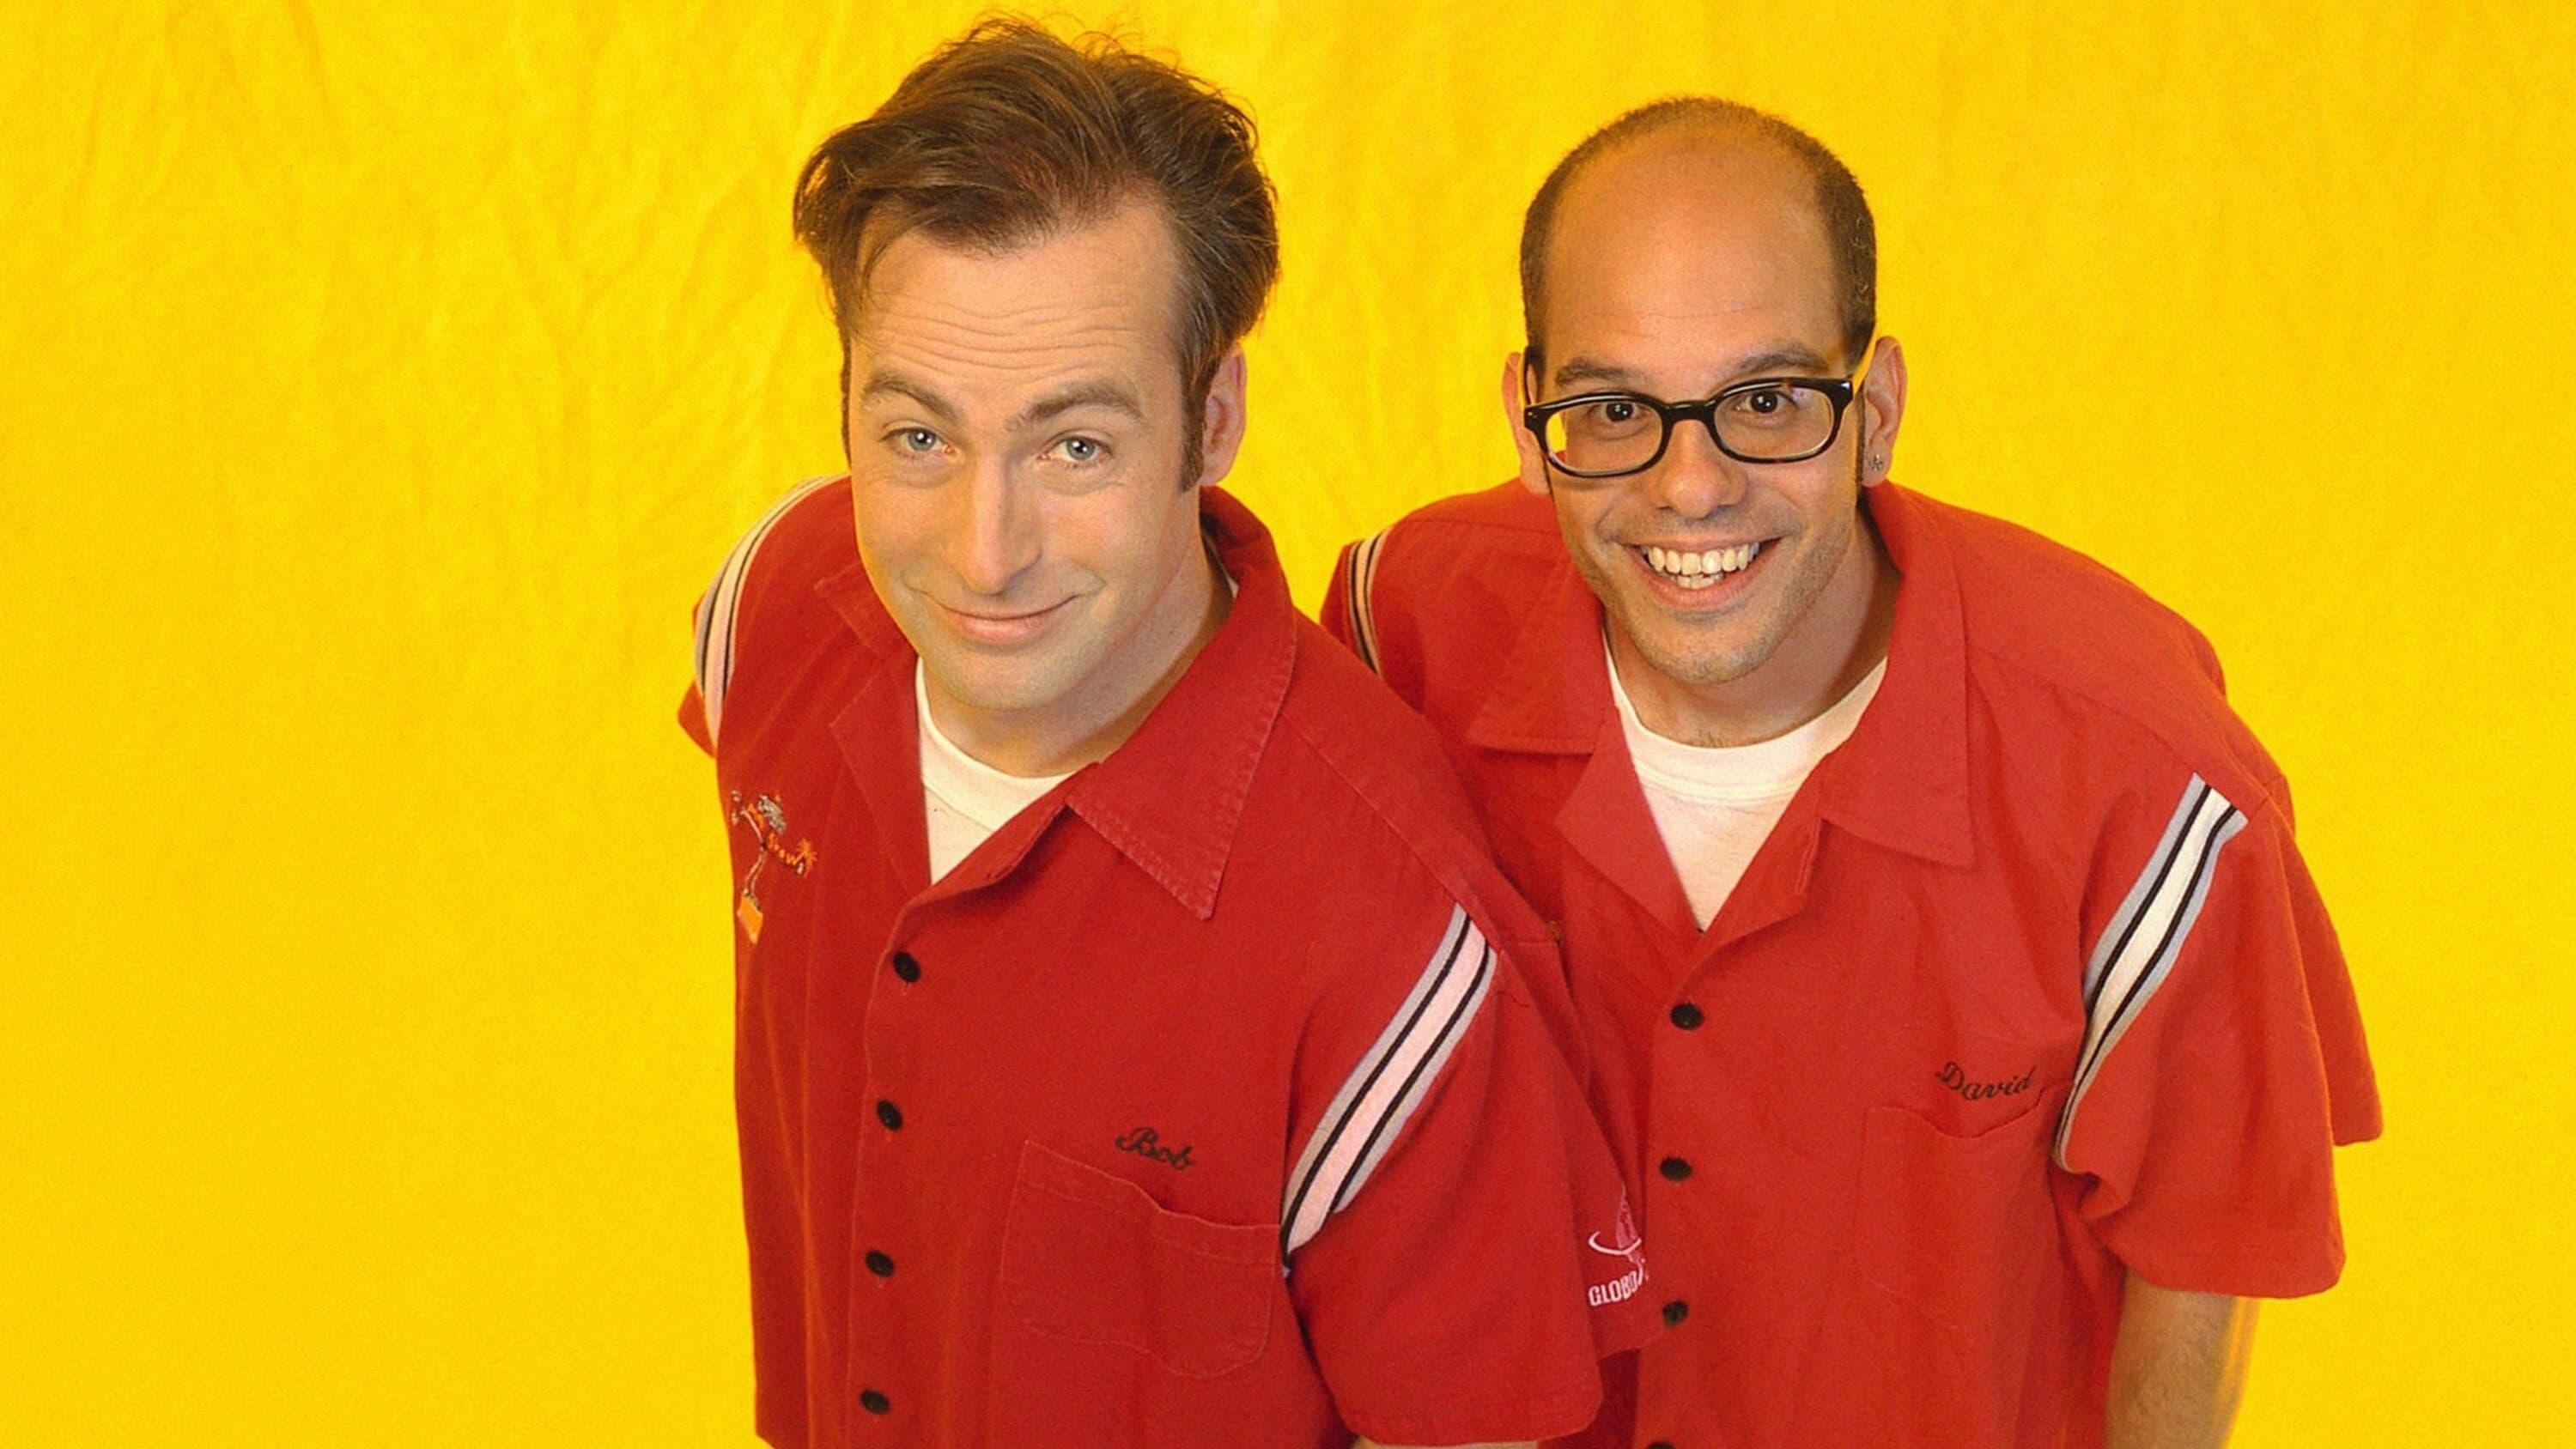 Mr. Show with Bob and David backdrop